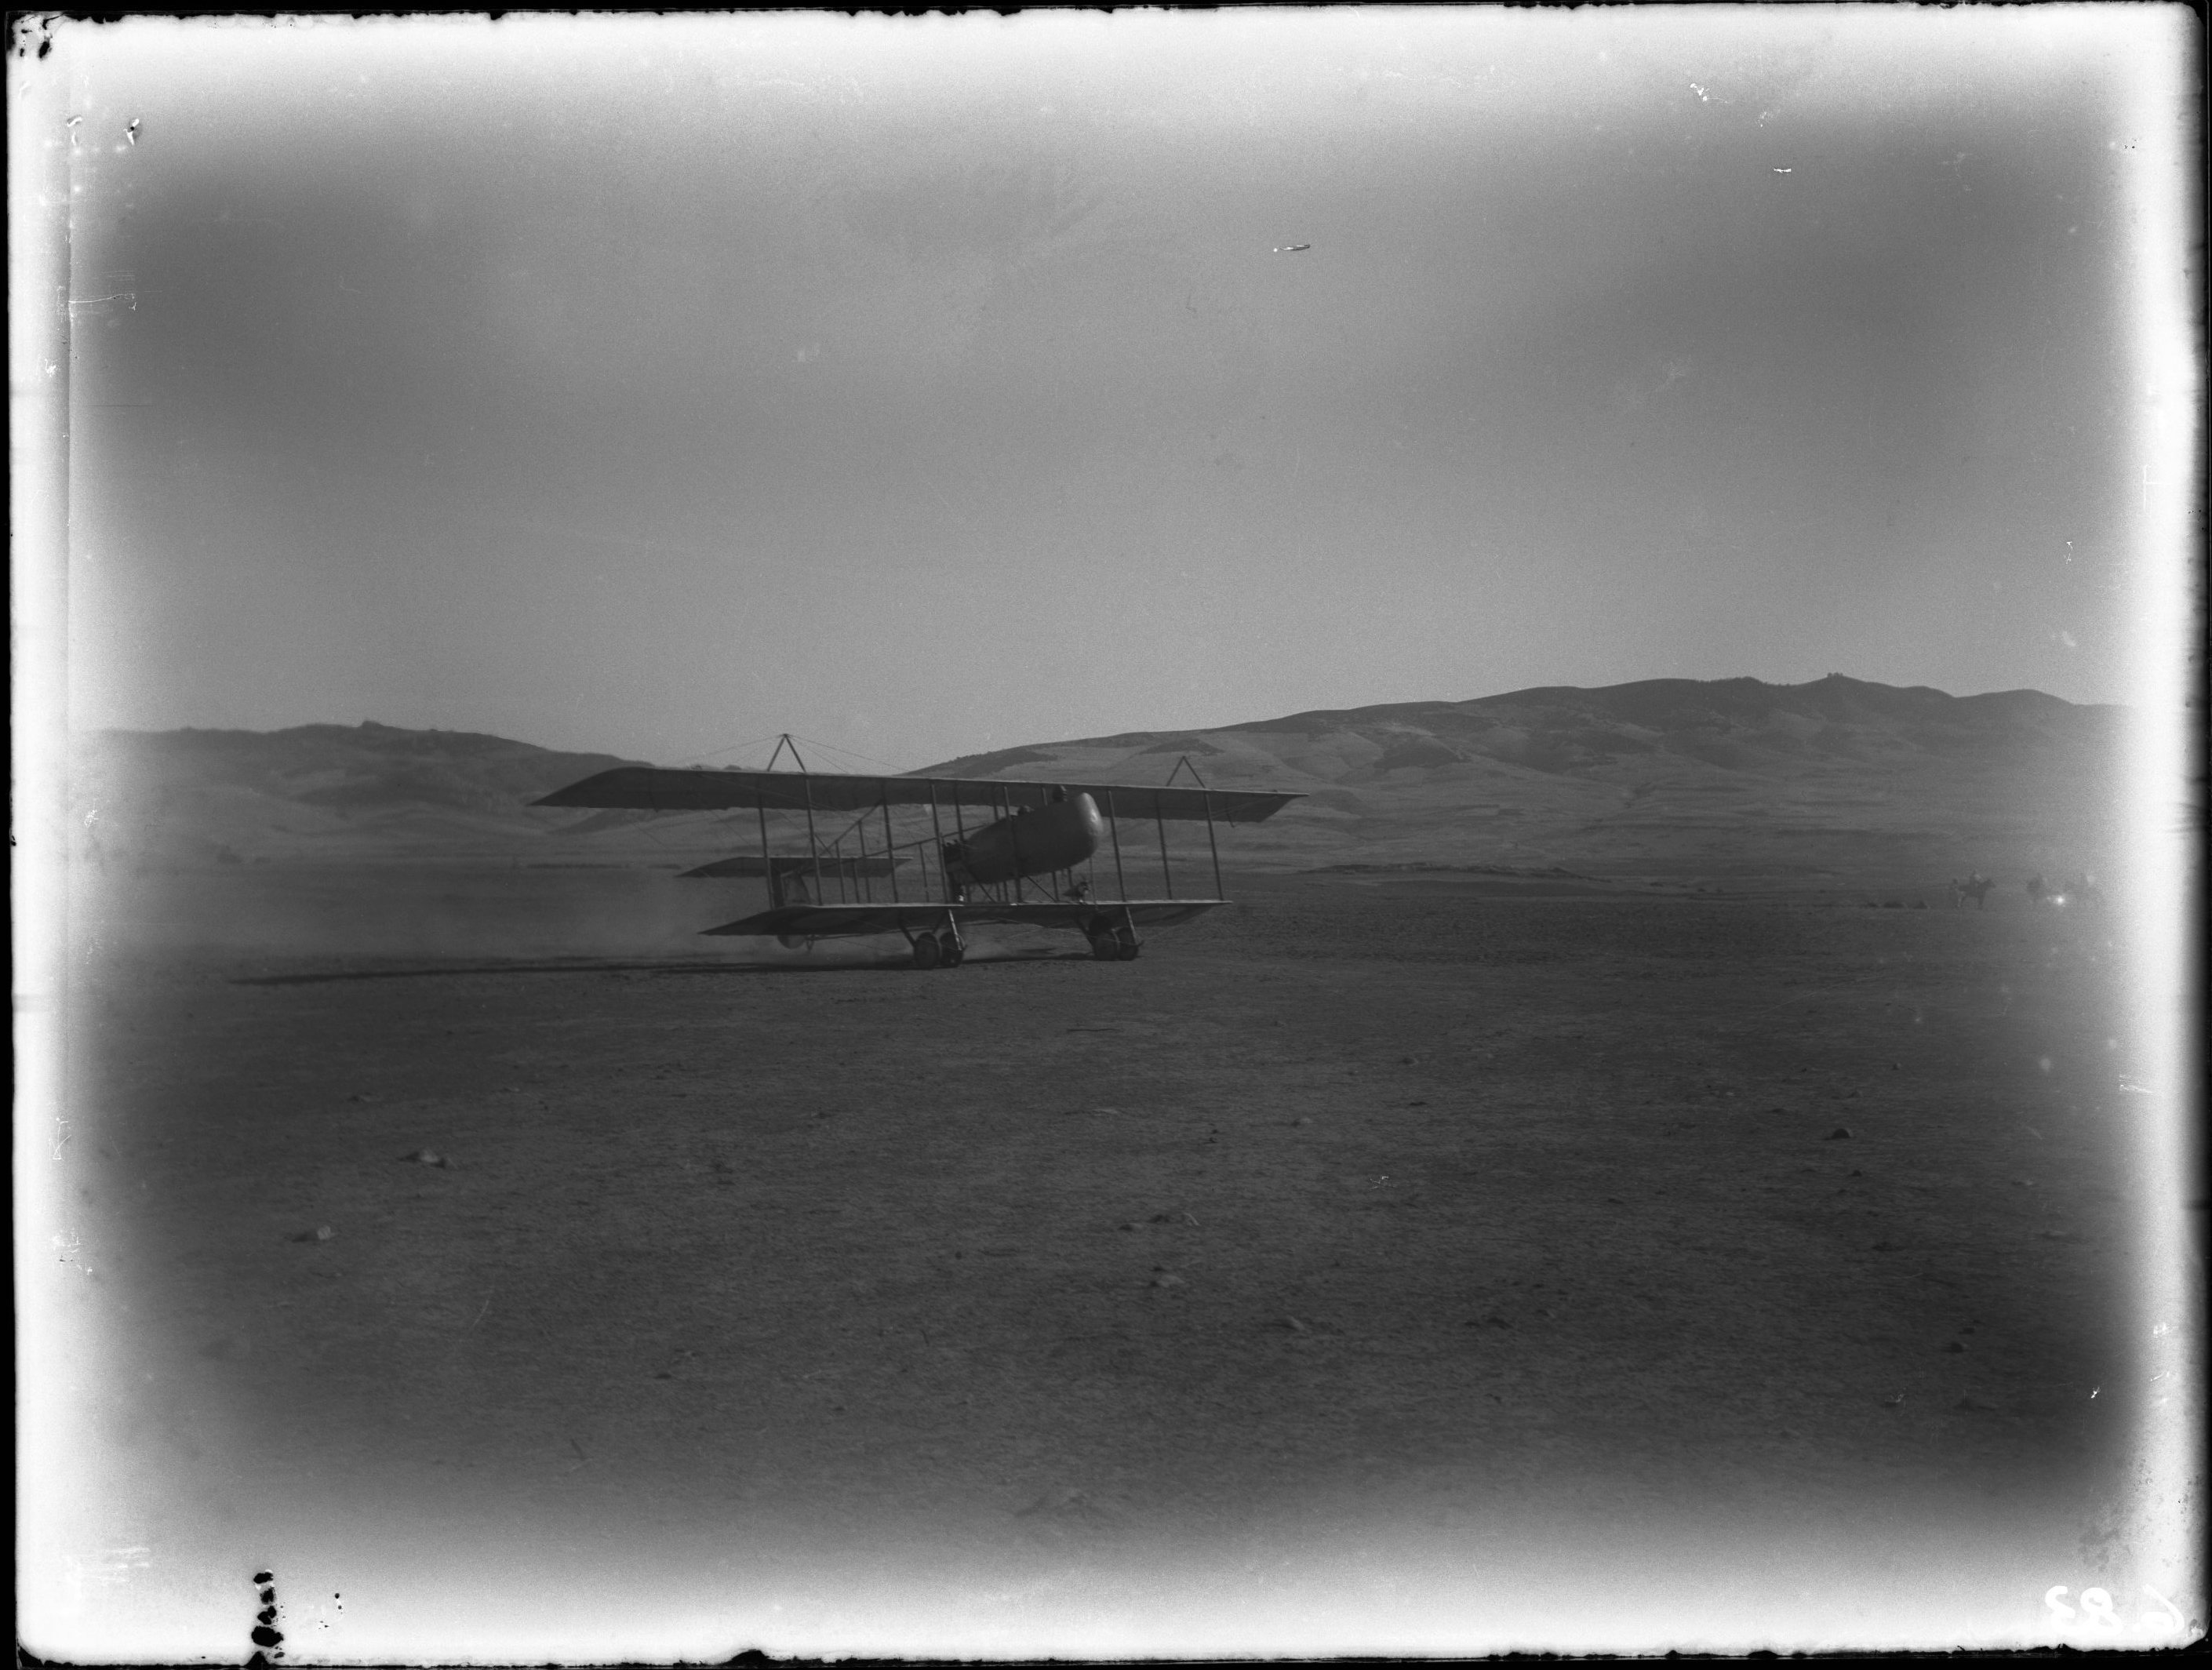 Aeroport Ibn Battouta de Tanger - <p>View of a biplane taxiing, mountains in the background.</p>